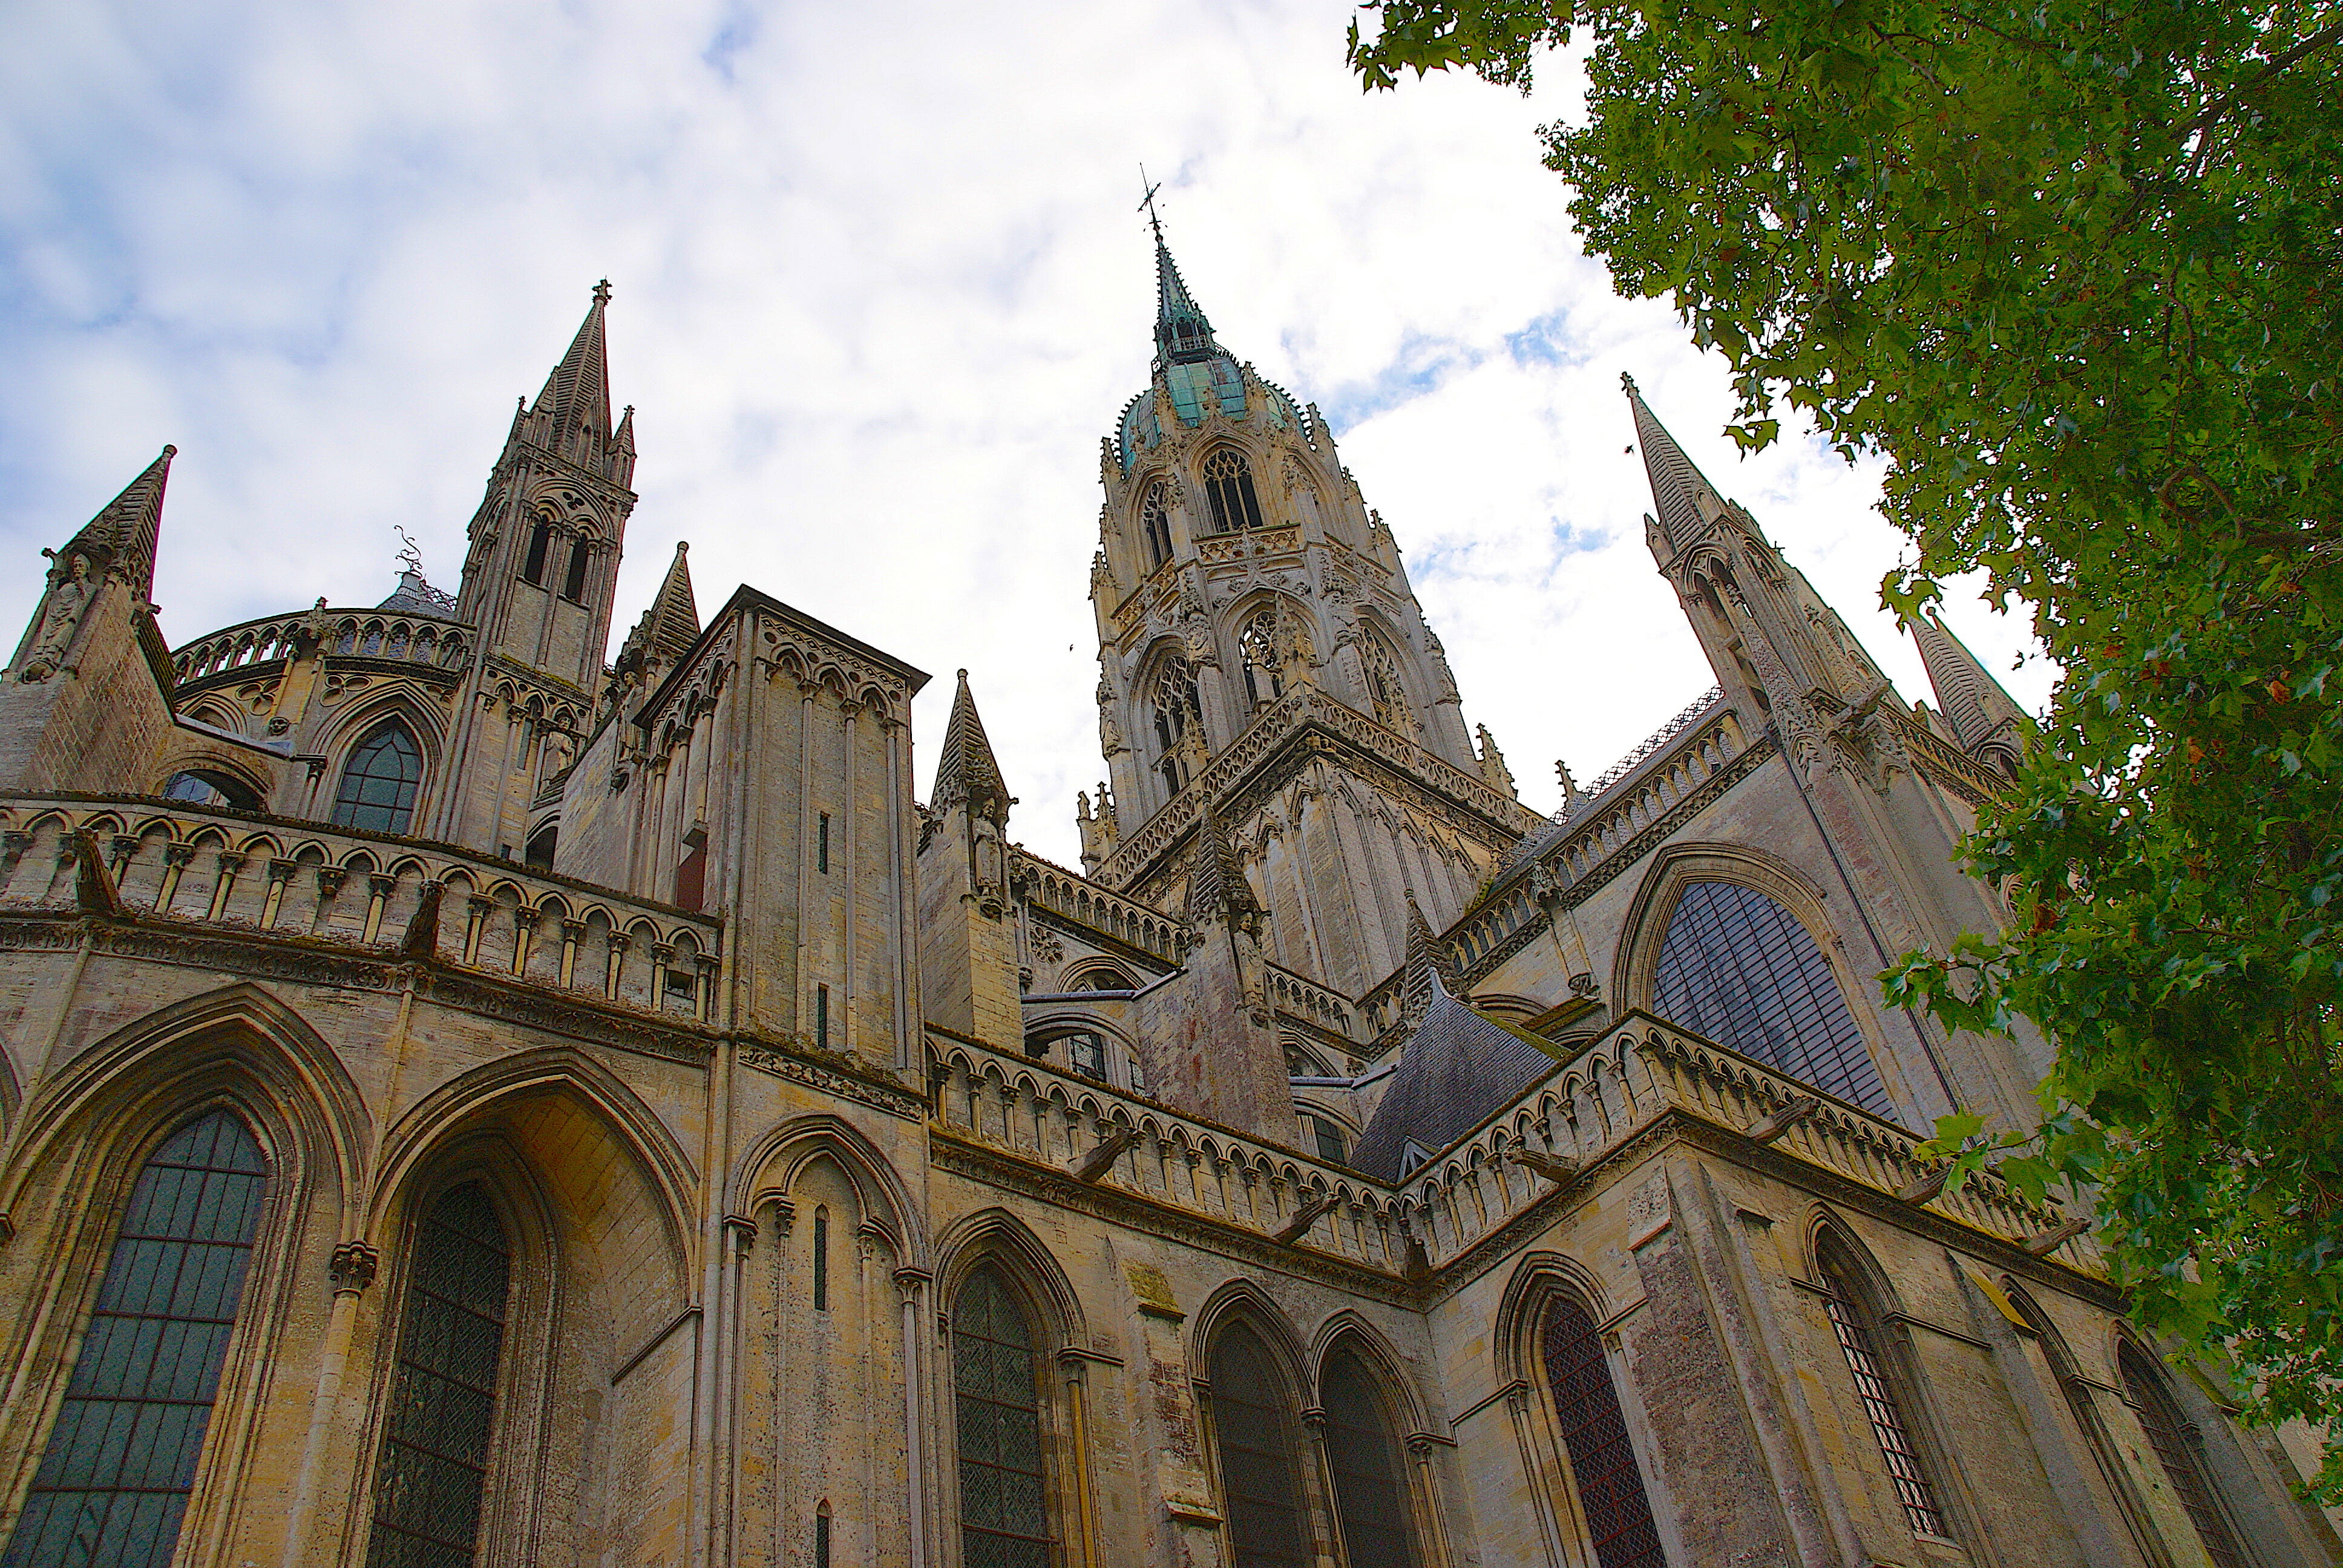 Looking up at the Gothic windows and spires of Bayeux Cathedral